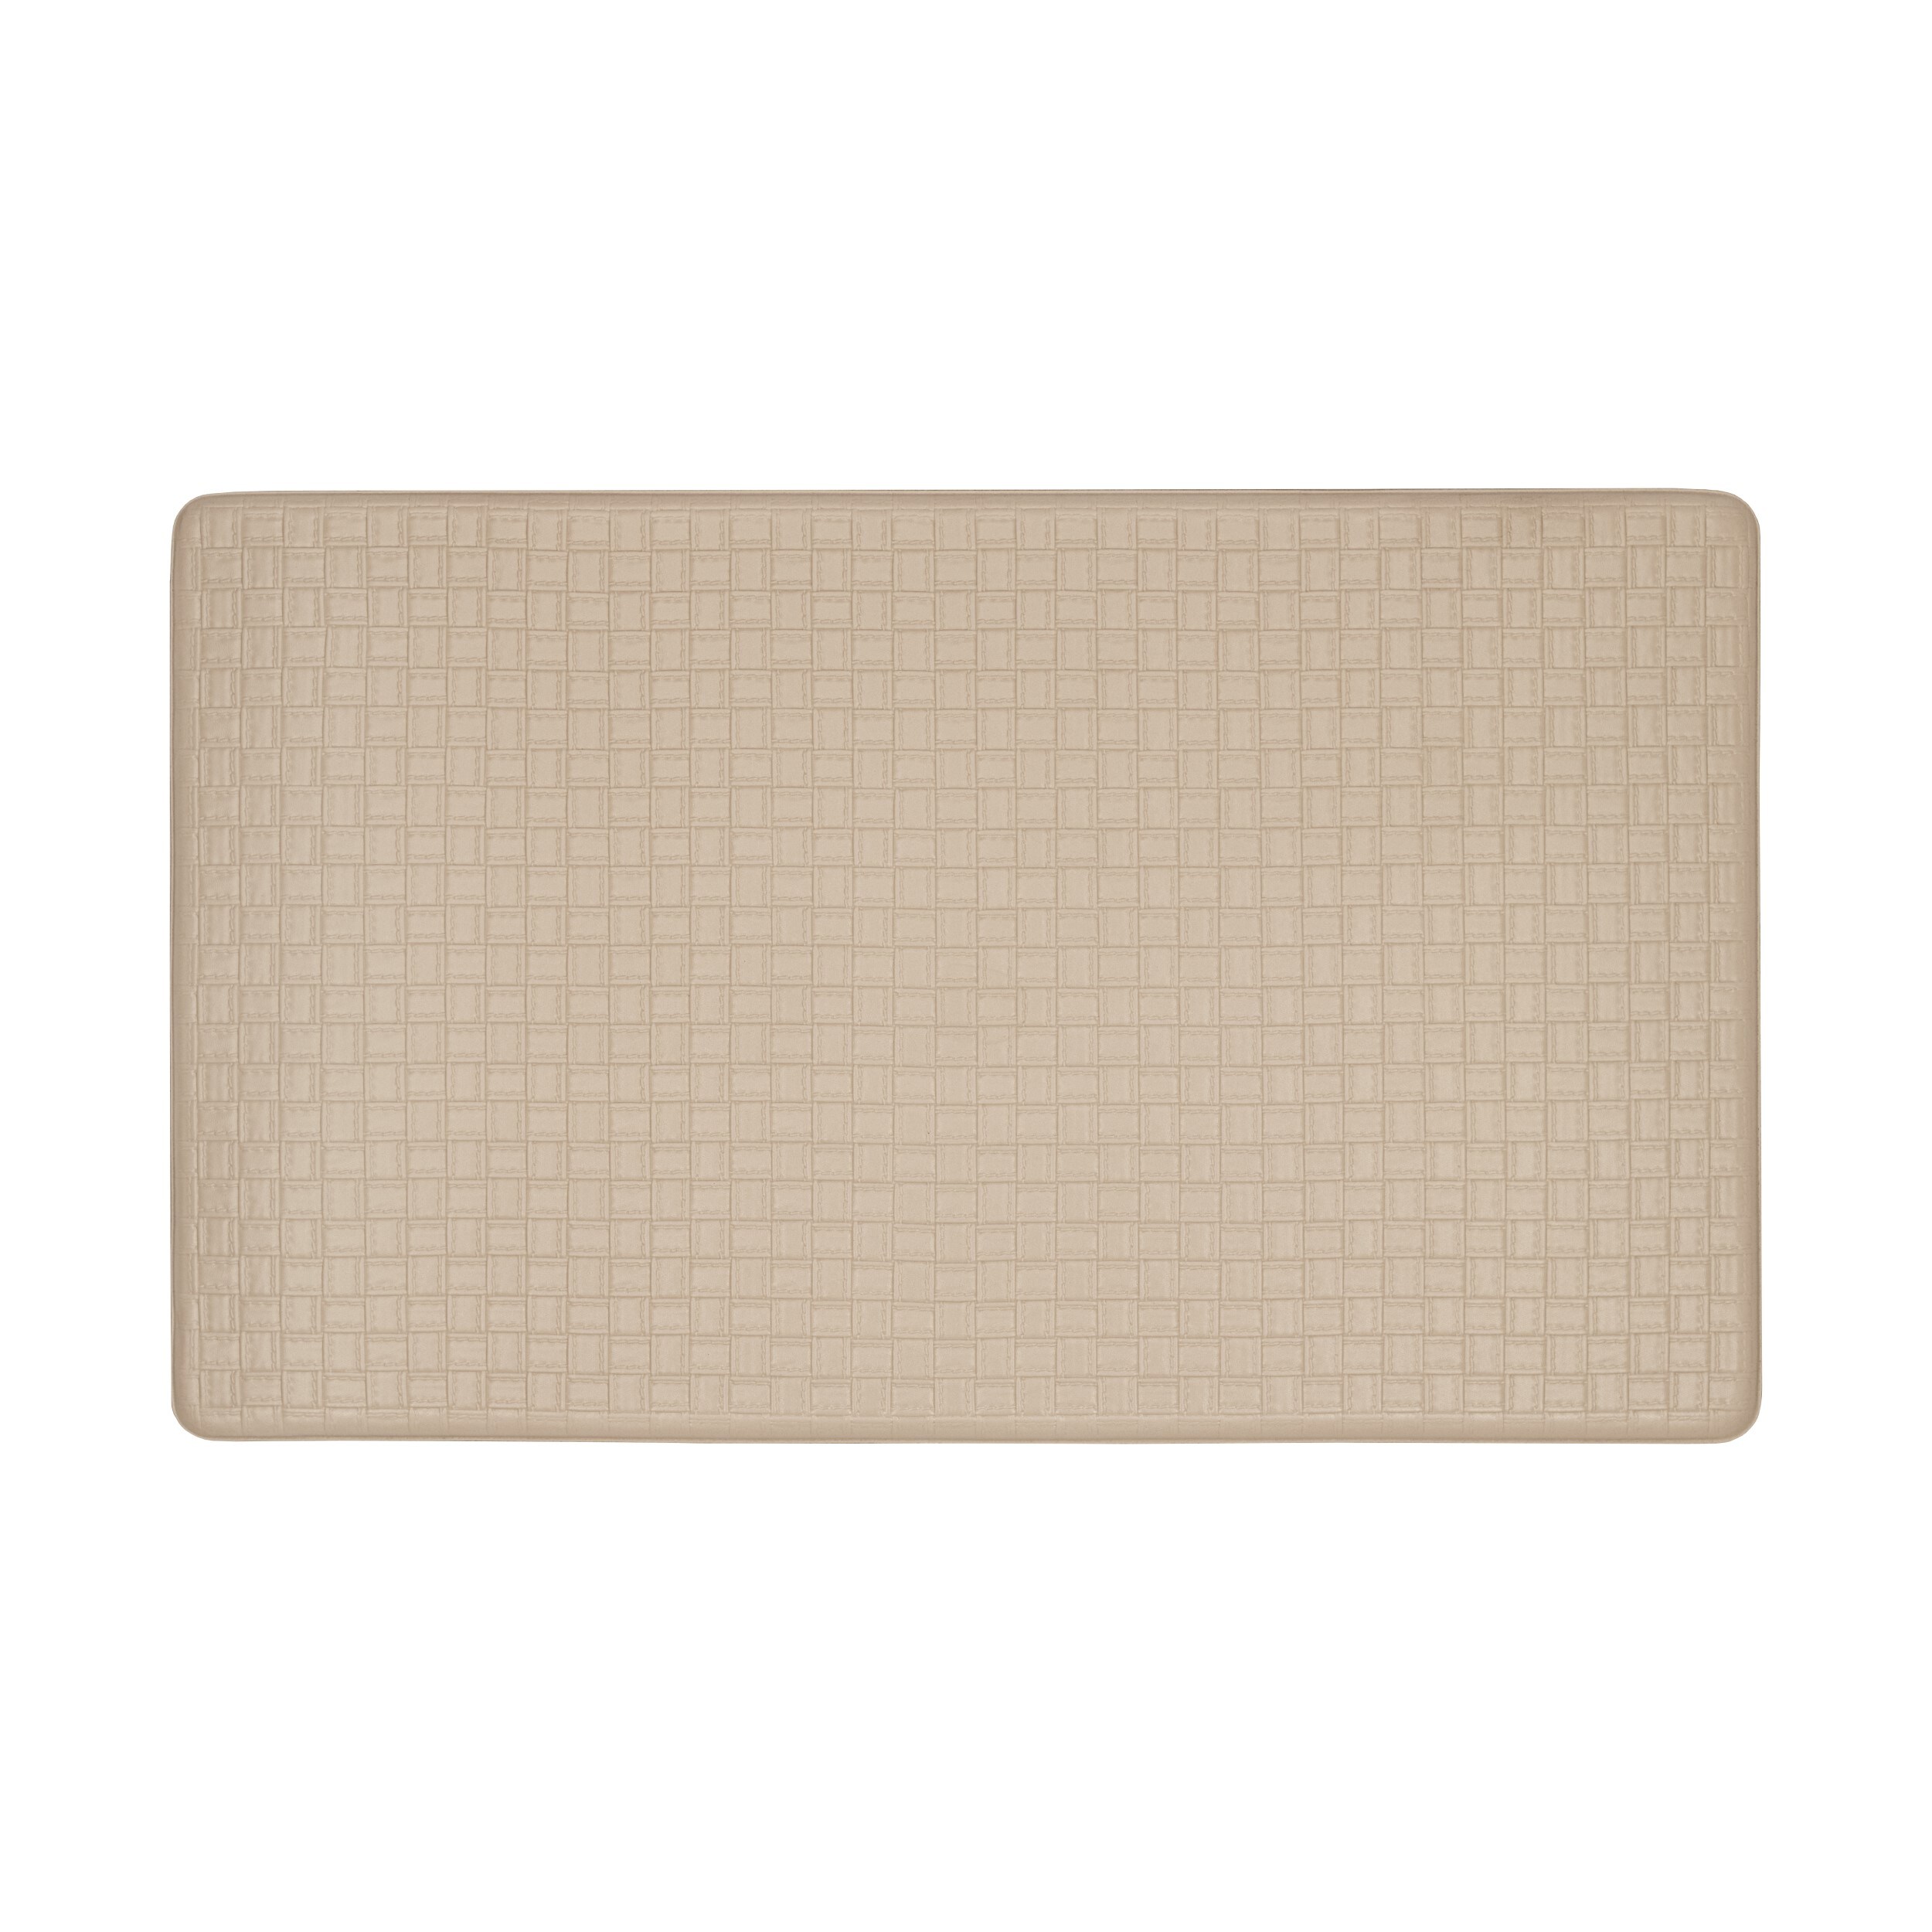 Achim Woven-Embossed Faux-Leather Anti-Fatigue Mat - 20 x 39 Black